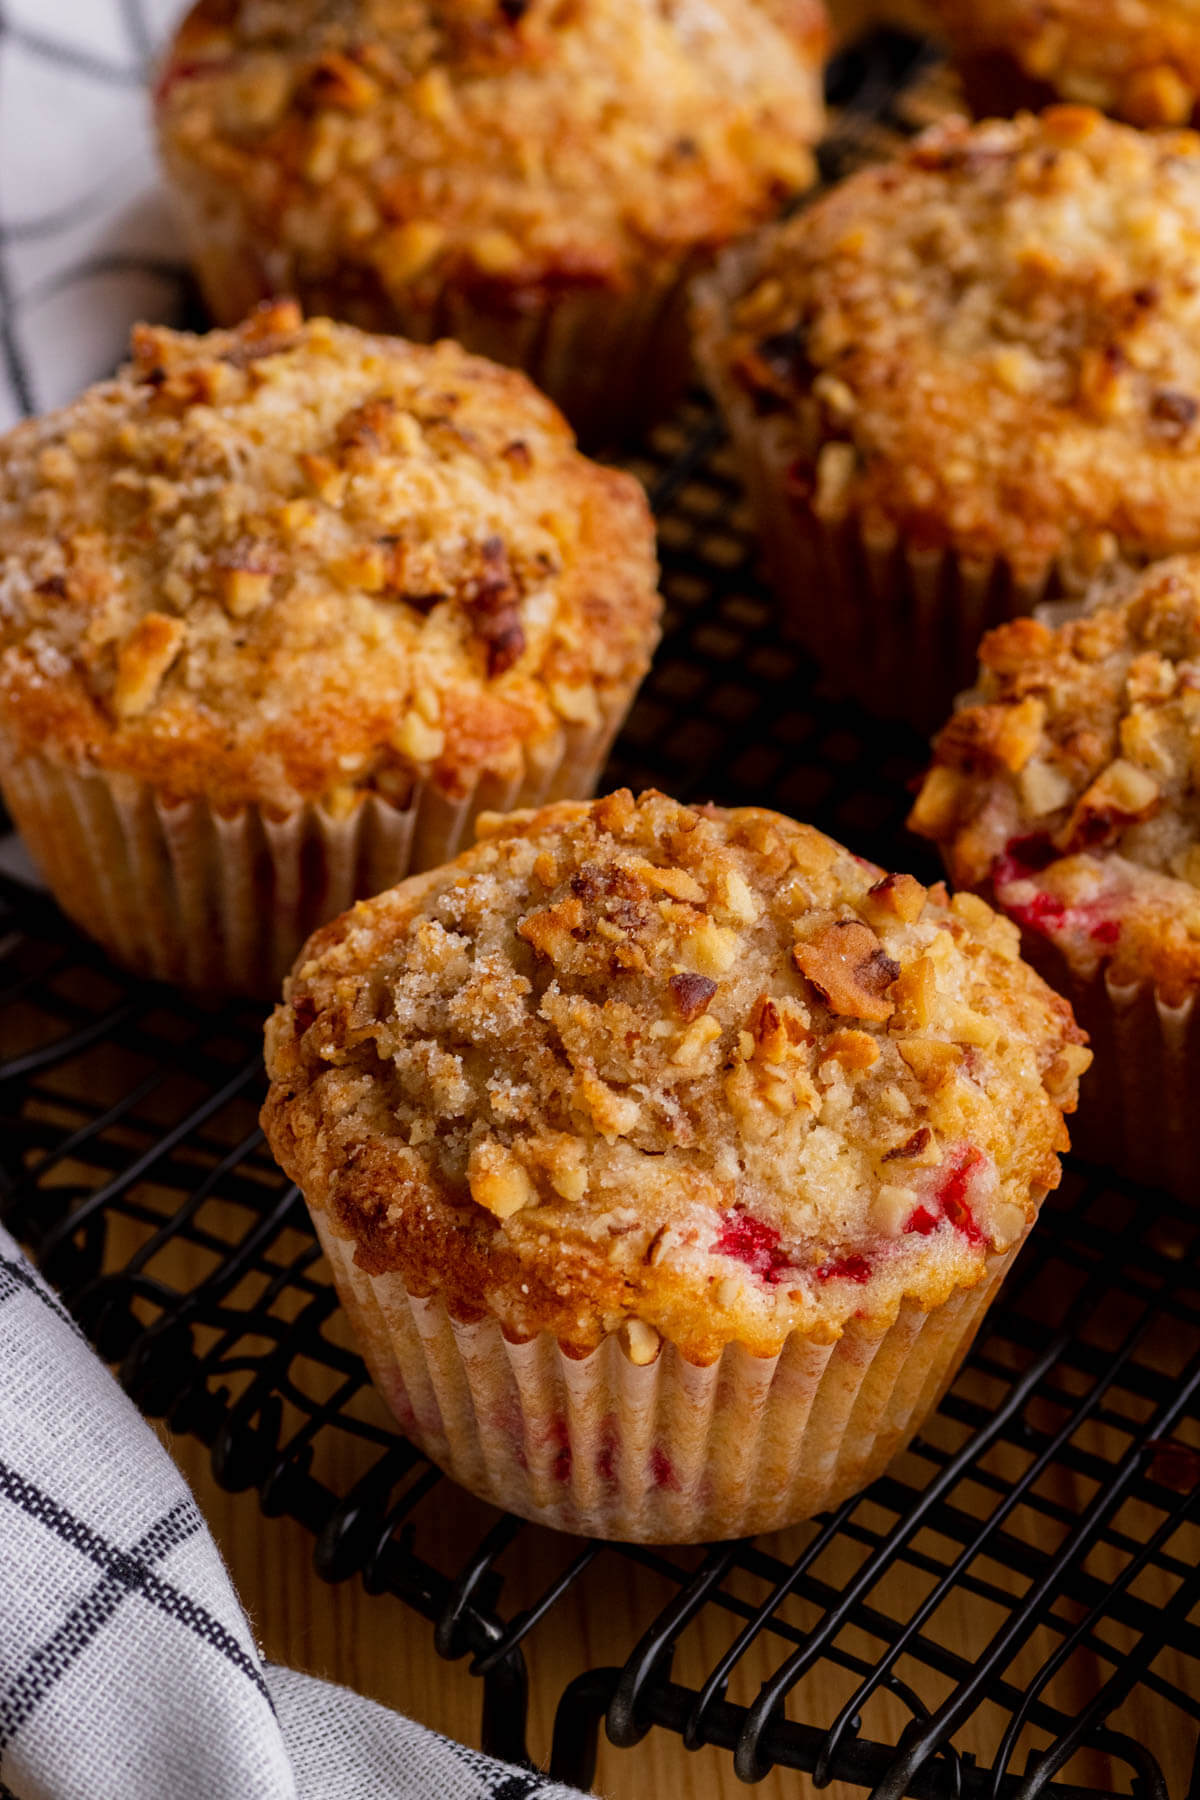 Golden baked strawberry rhubarb muffins cooling on a black round rack.